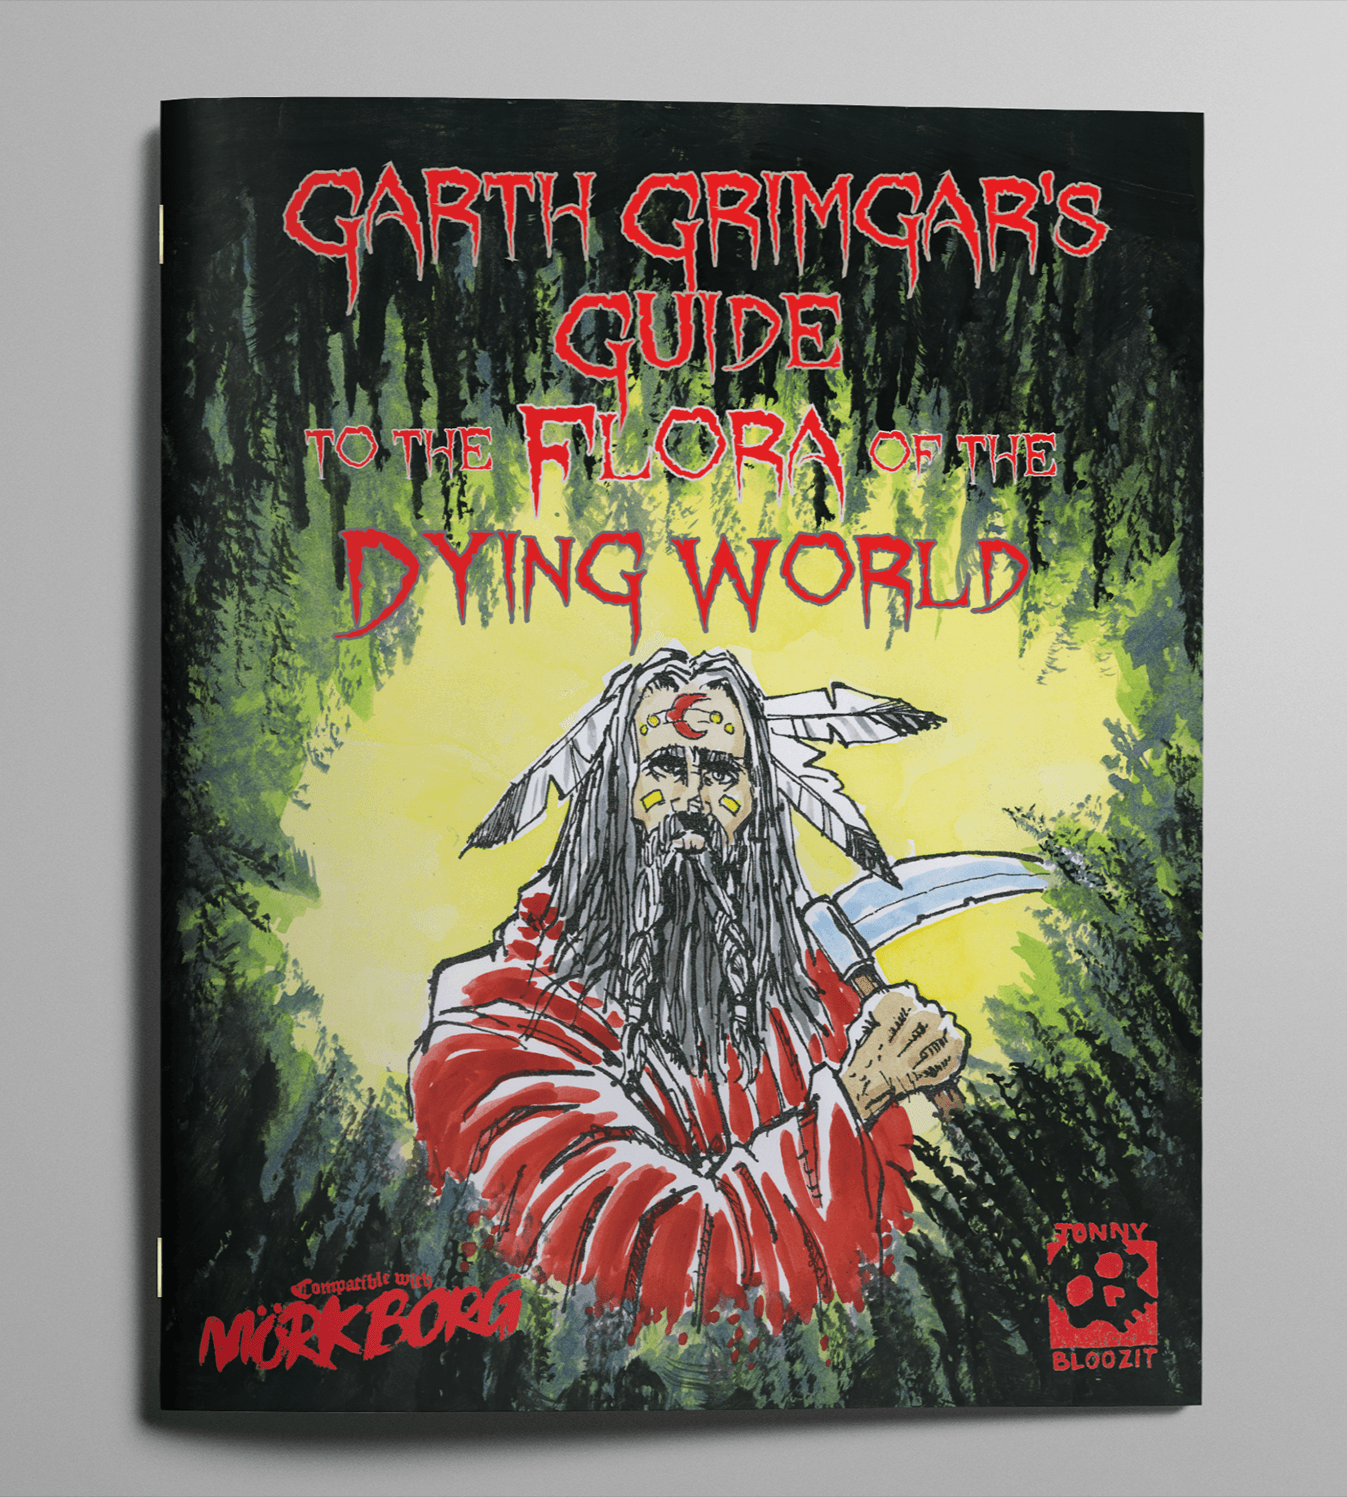 GARTH GRIMGAR'S GUIDE TO THE FLORA OF THE DYING WORLD